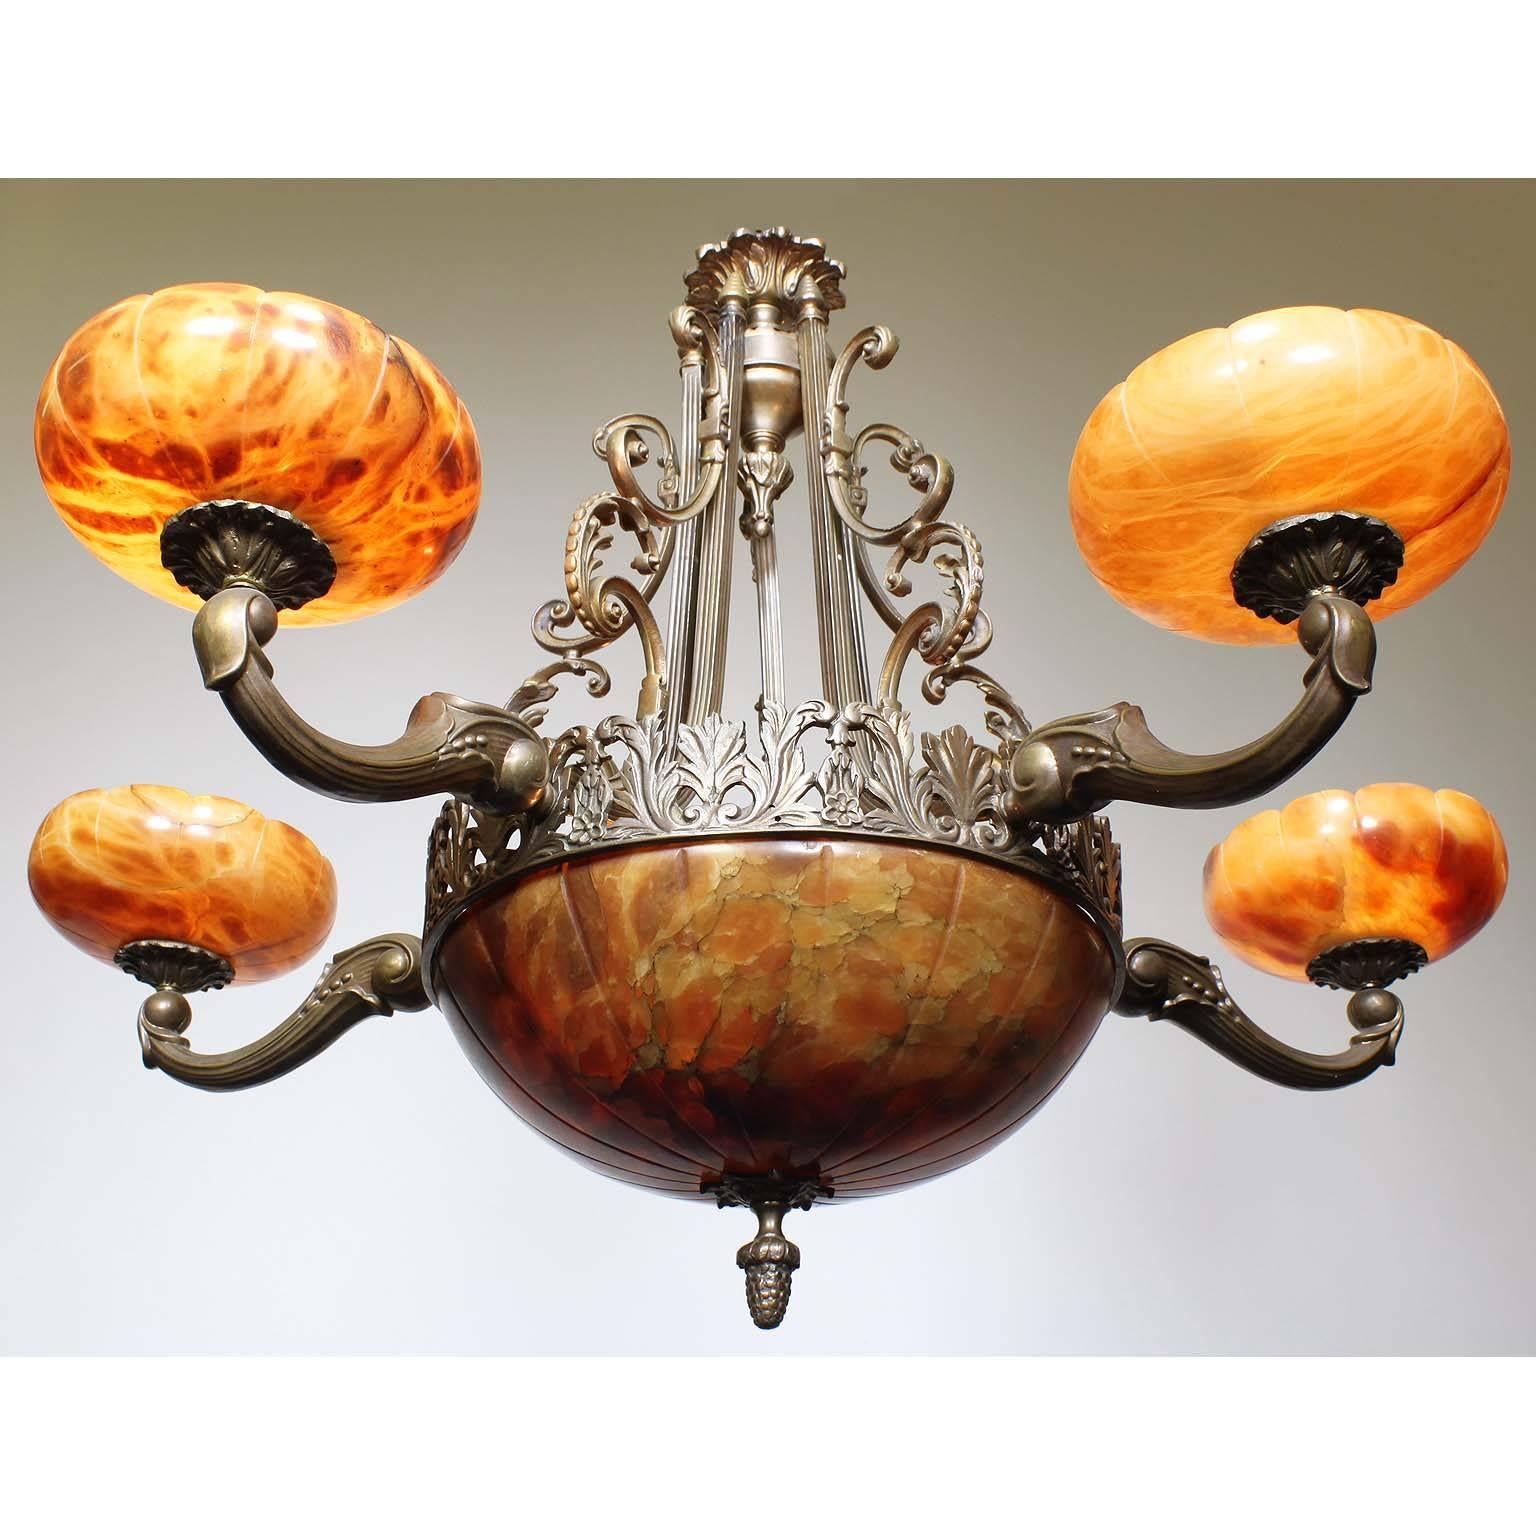 A French 20th century Art Deco bronze and carved veined caramel-colored alabaster five-light chandelier. The carved circular alabaster plafonnier, with two interior lights, on a floral apron and banded bronze frame surmounted with five 